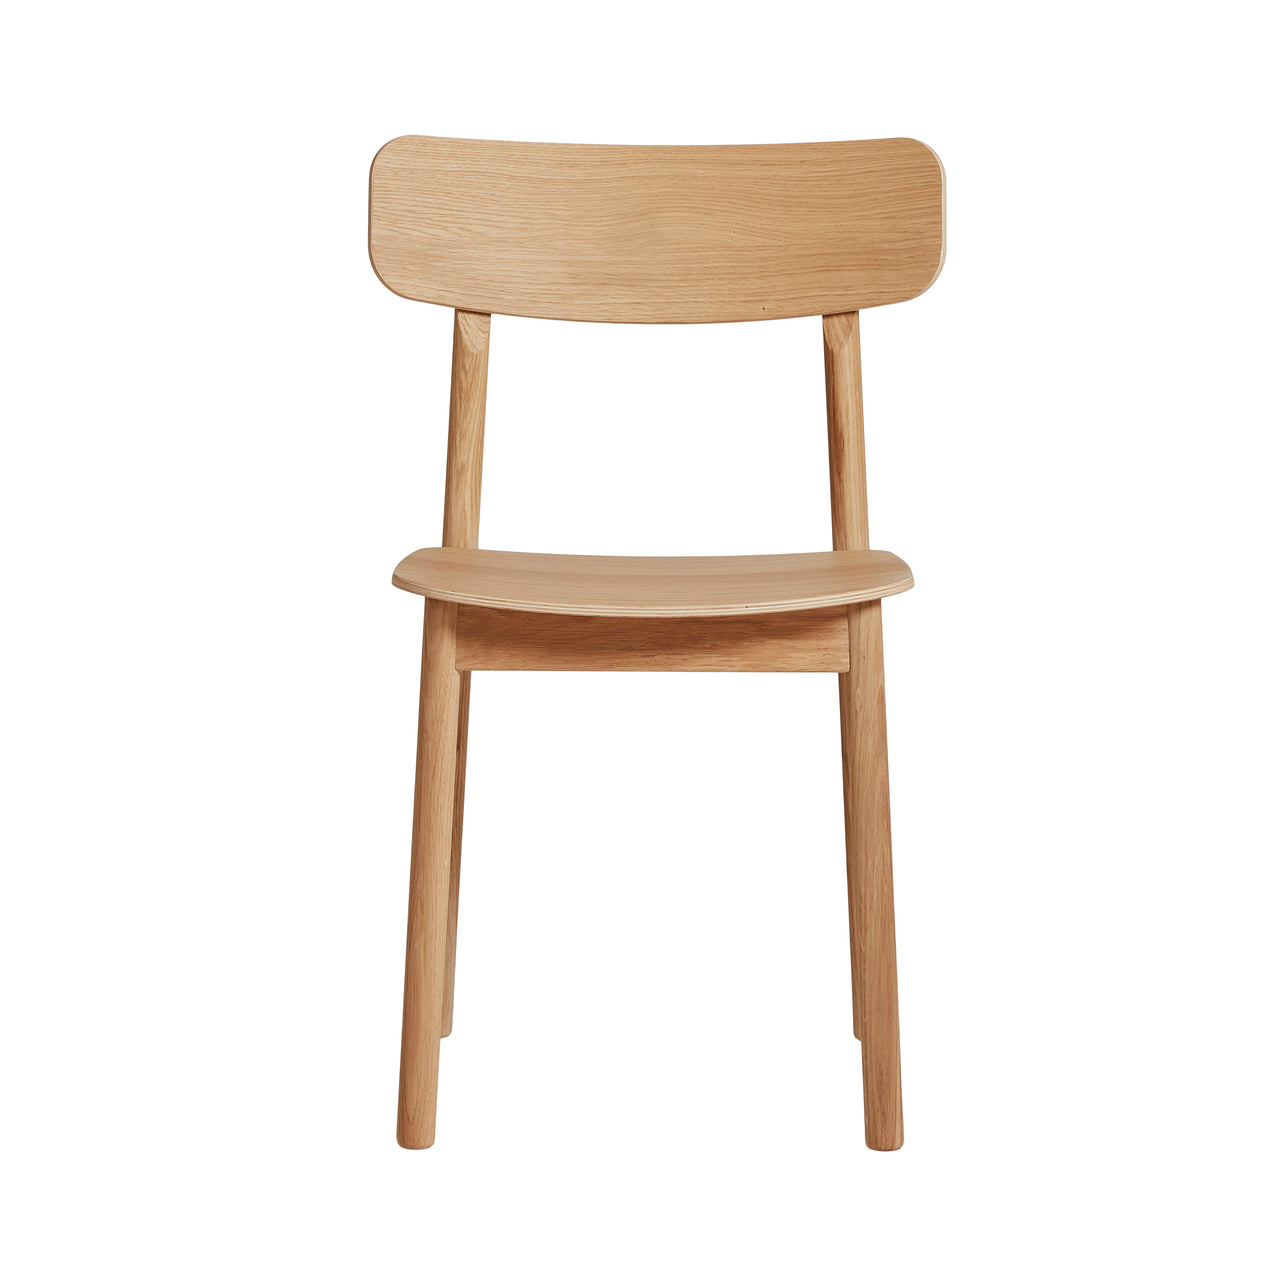 Soma Dining Chair: Oiled Oak + Without Seatpad